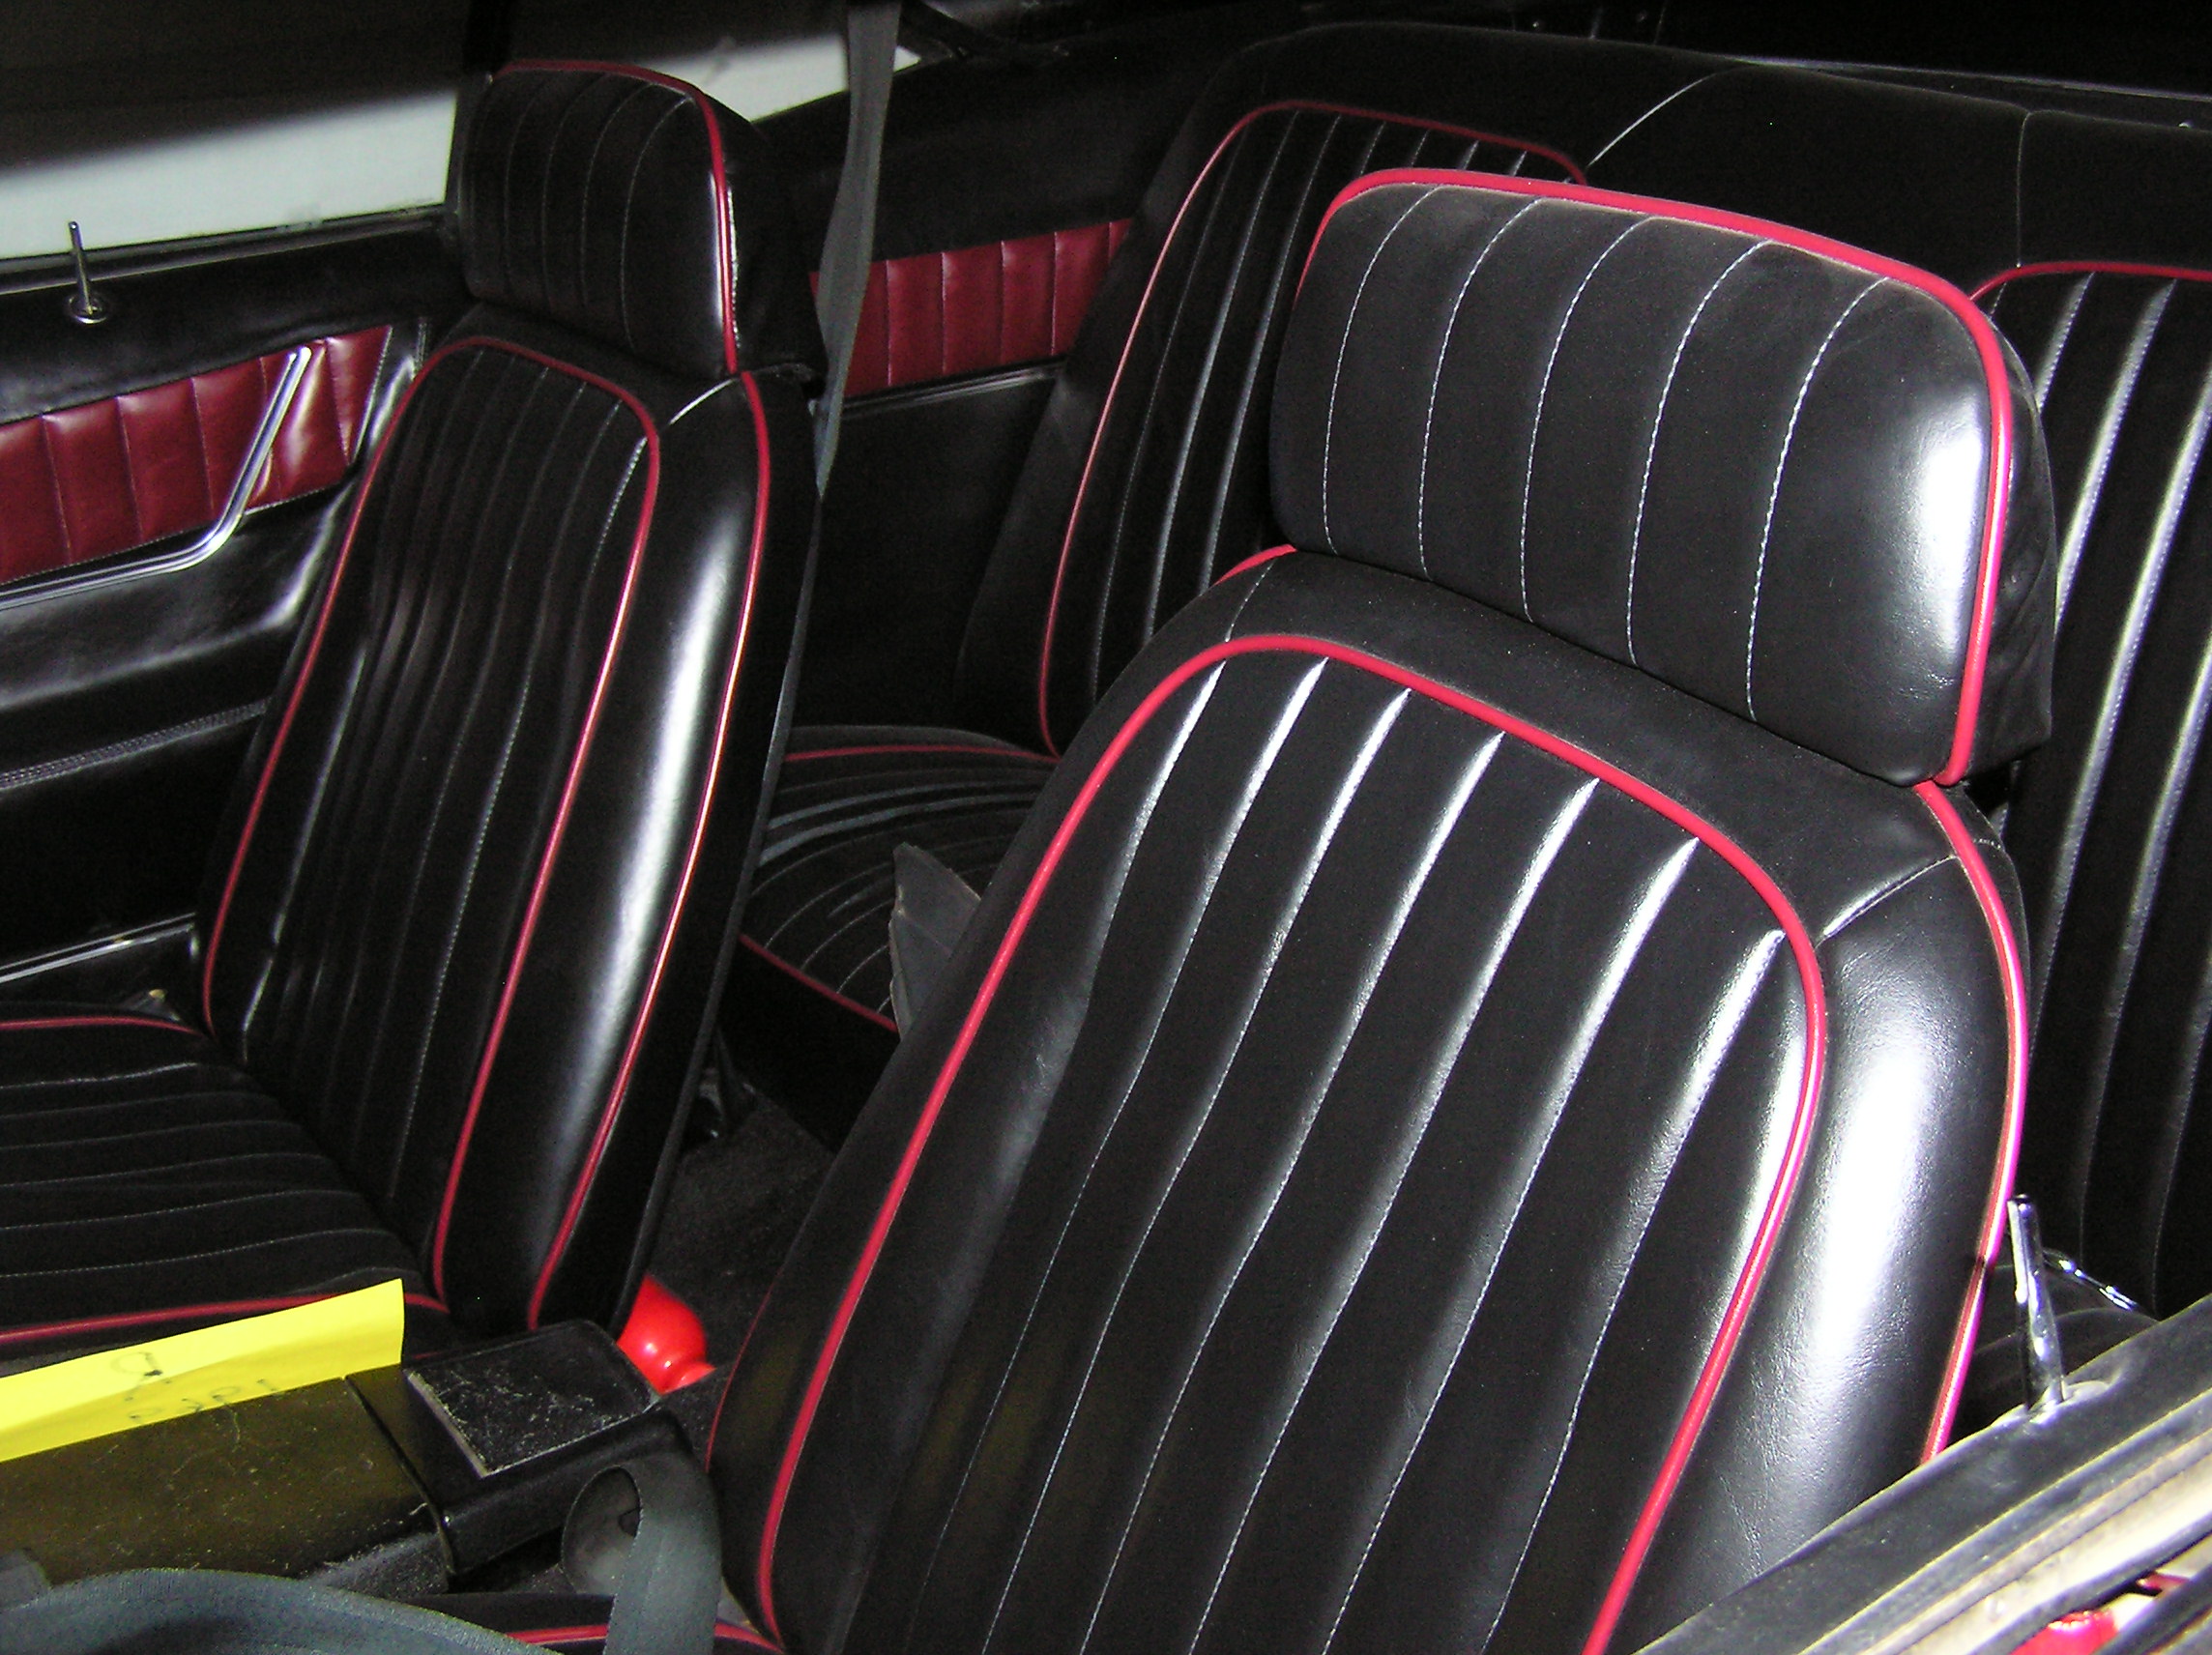 Classic Car Upholstery Near Me - Upholstery